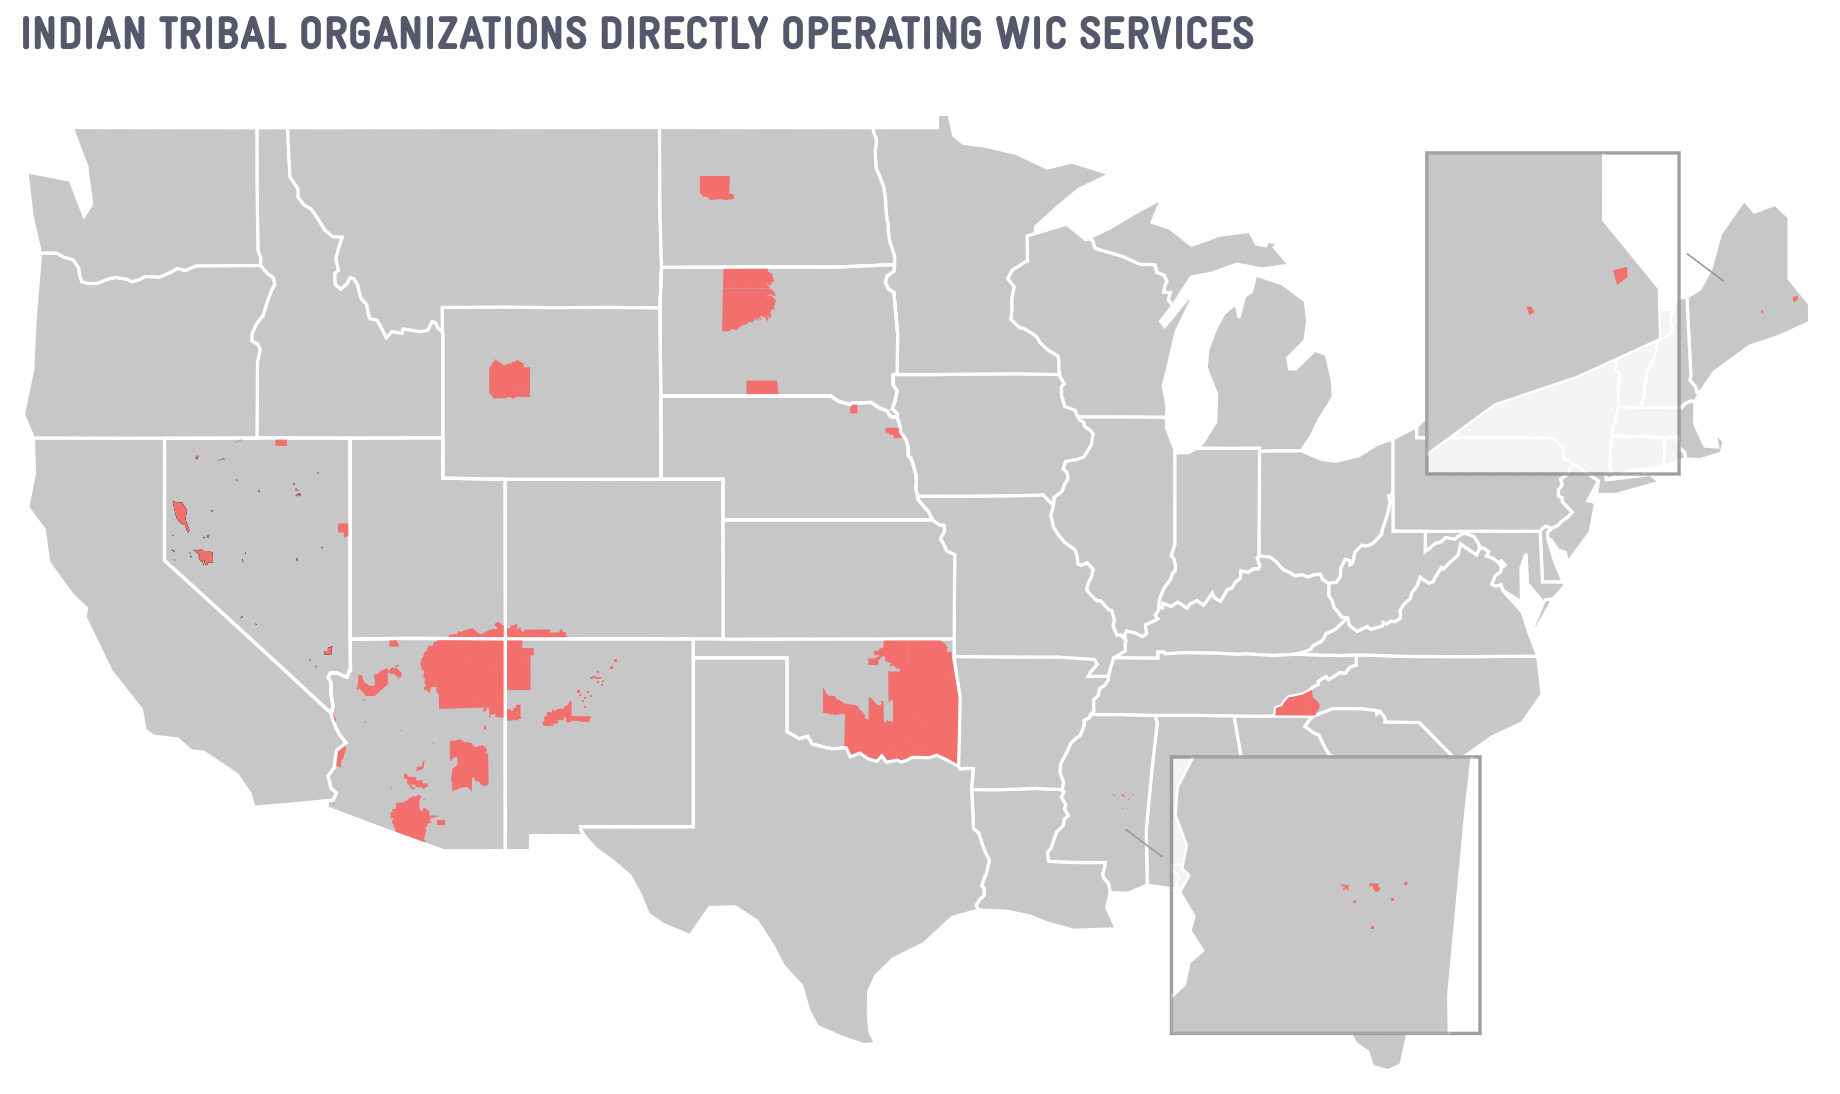 Indian Tribal Organizations Directly Operating WIC Services